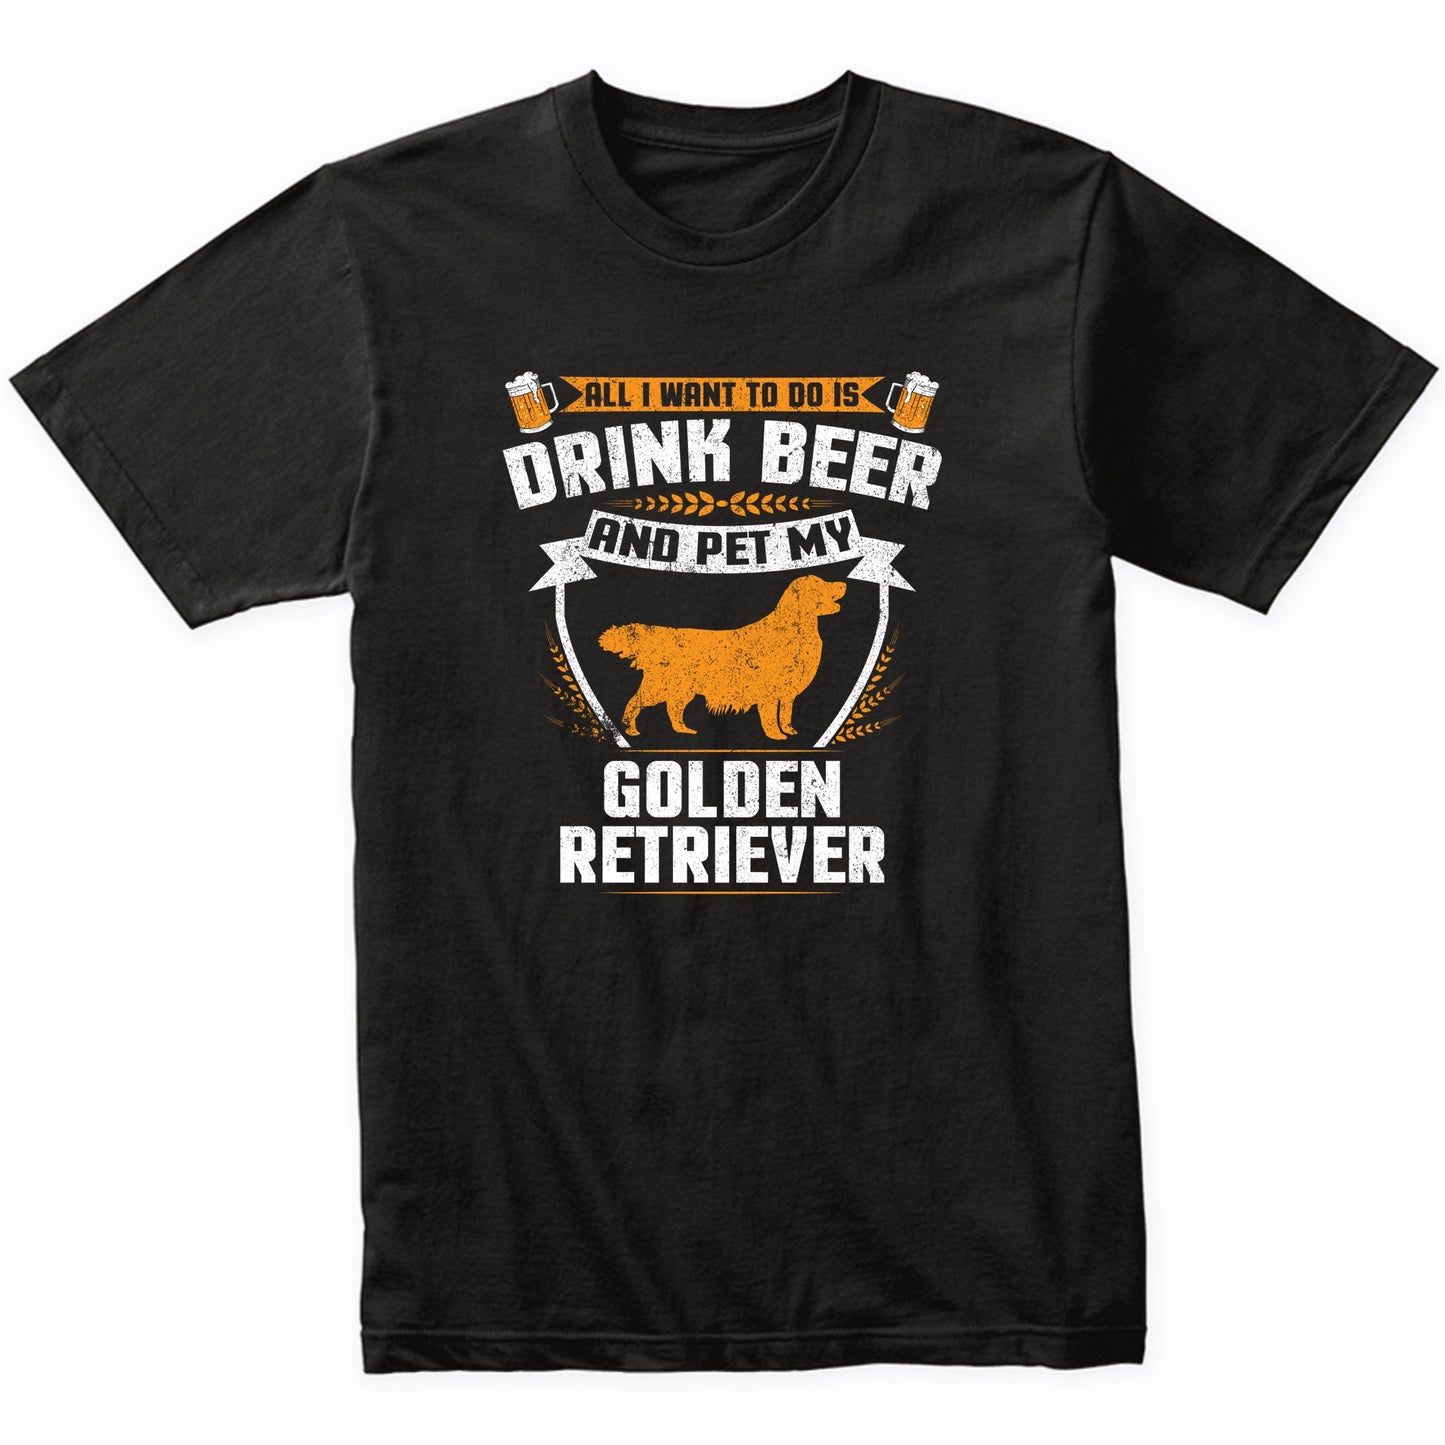 All I Want To Do Is Drink Beer And Pet My Golden Retriever Funny Dog Owner Shirt